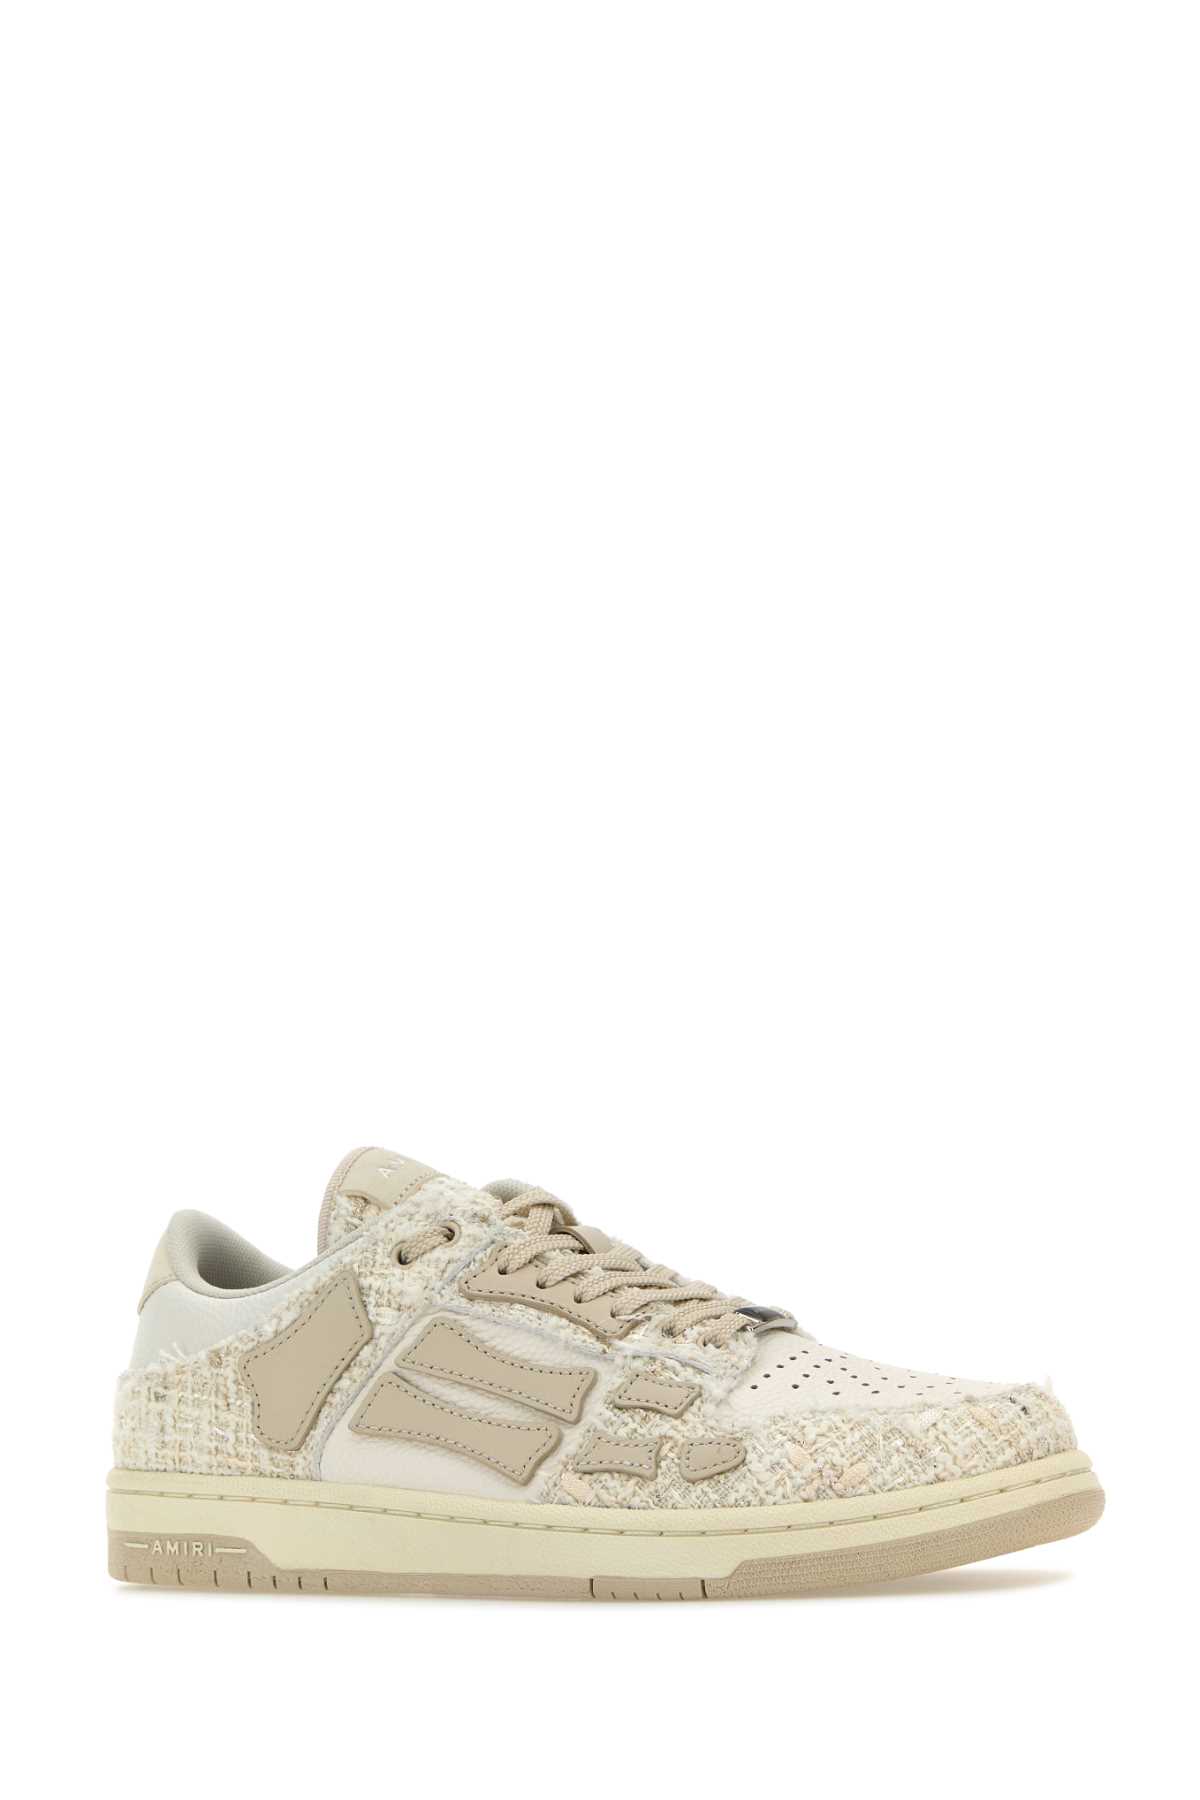 Shop Amiri Multicolor Leather And Fabric Skel Sneakers In Alabaster